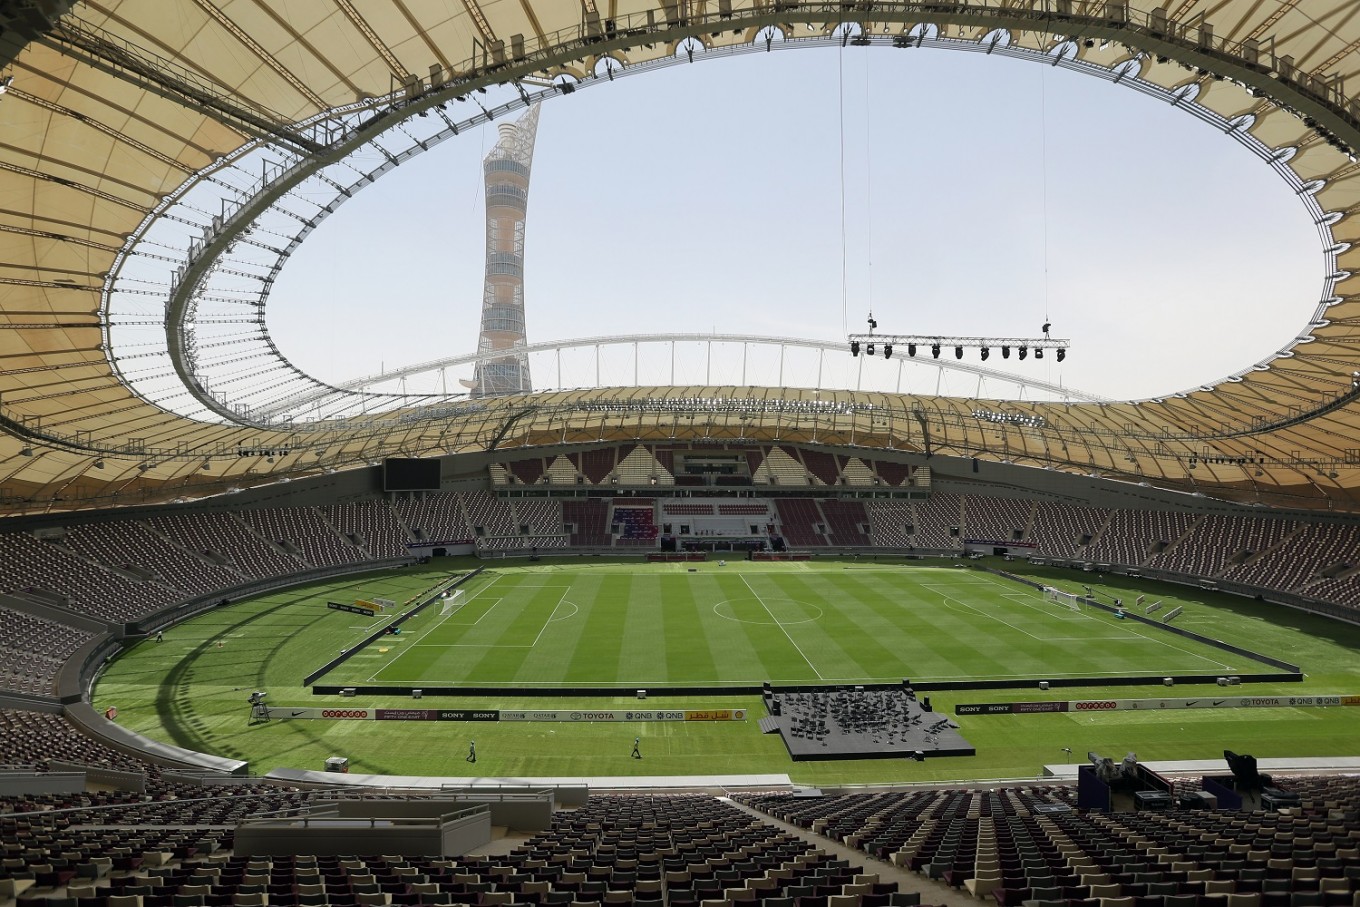 Air-conditioned Qatar World Cup stadium ready - Sports - The Jakarta Post